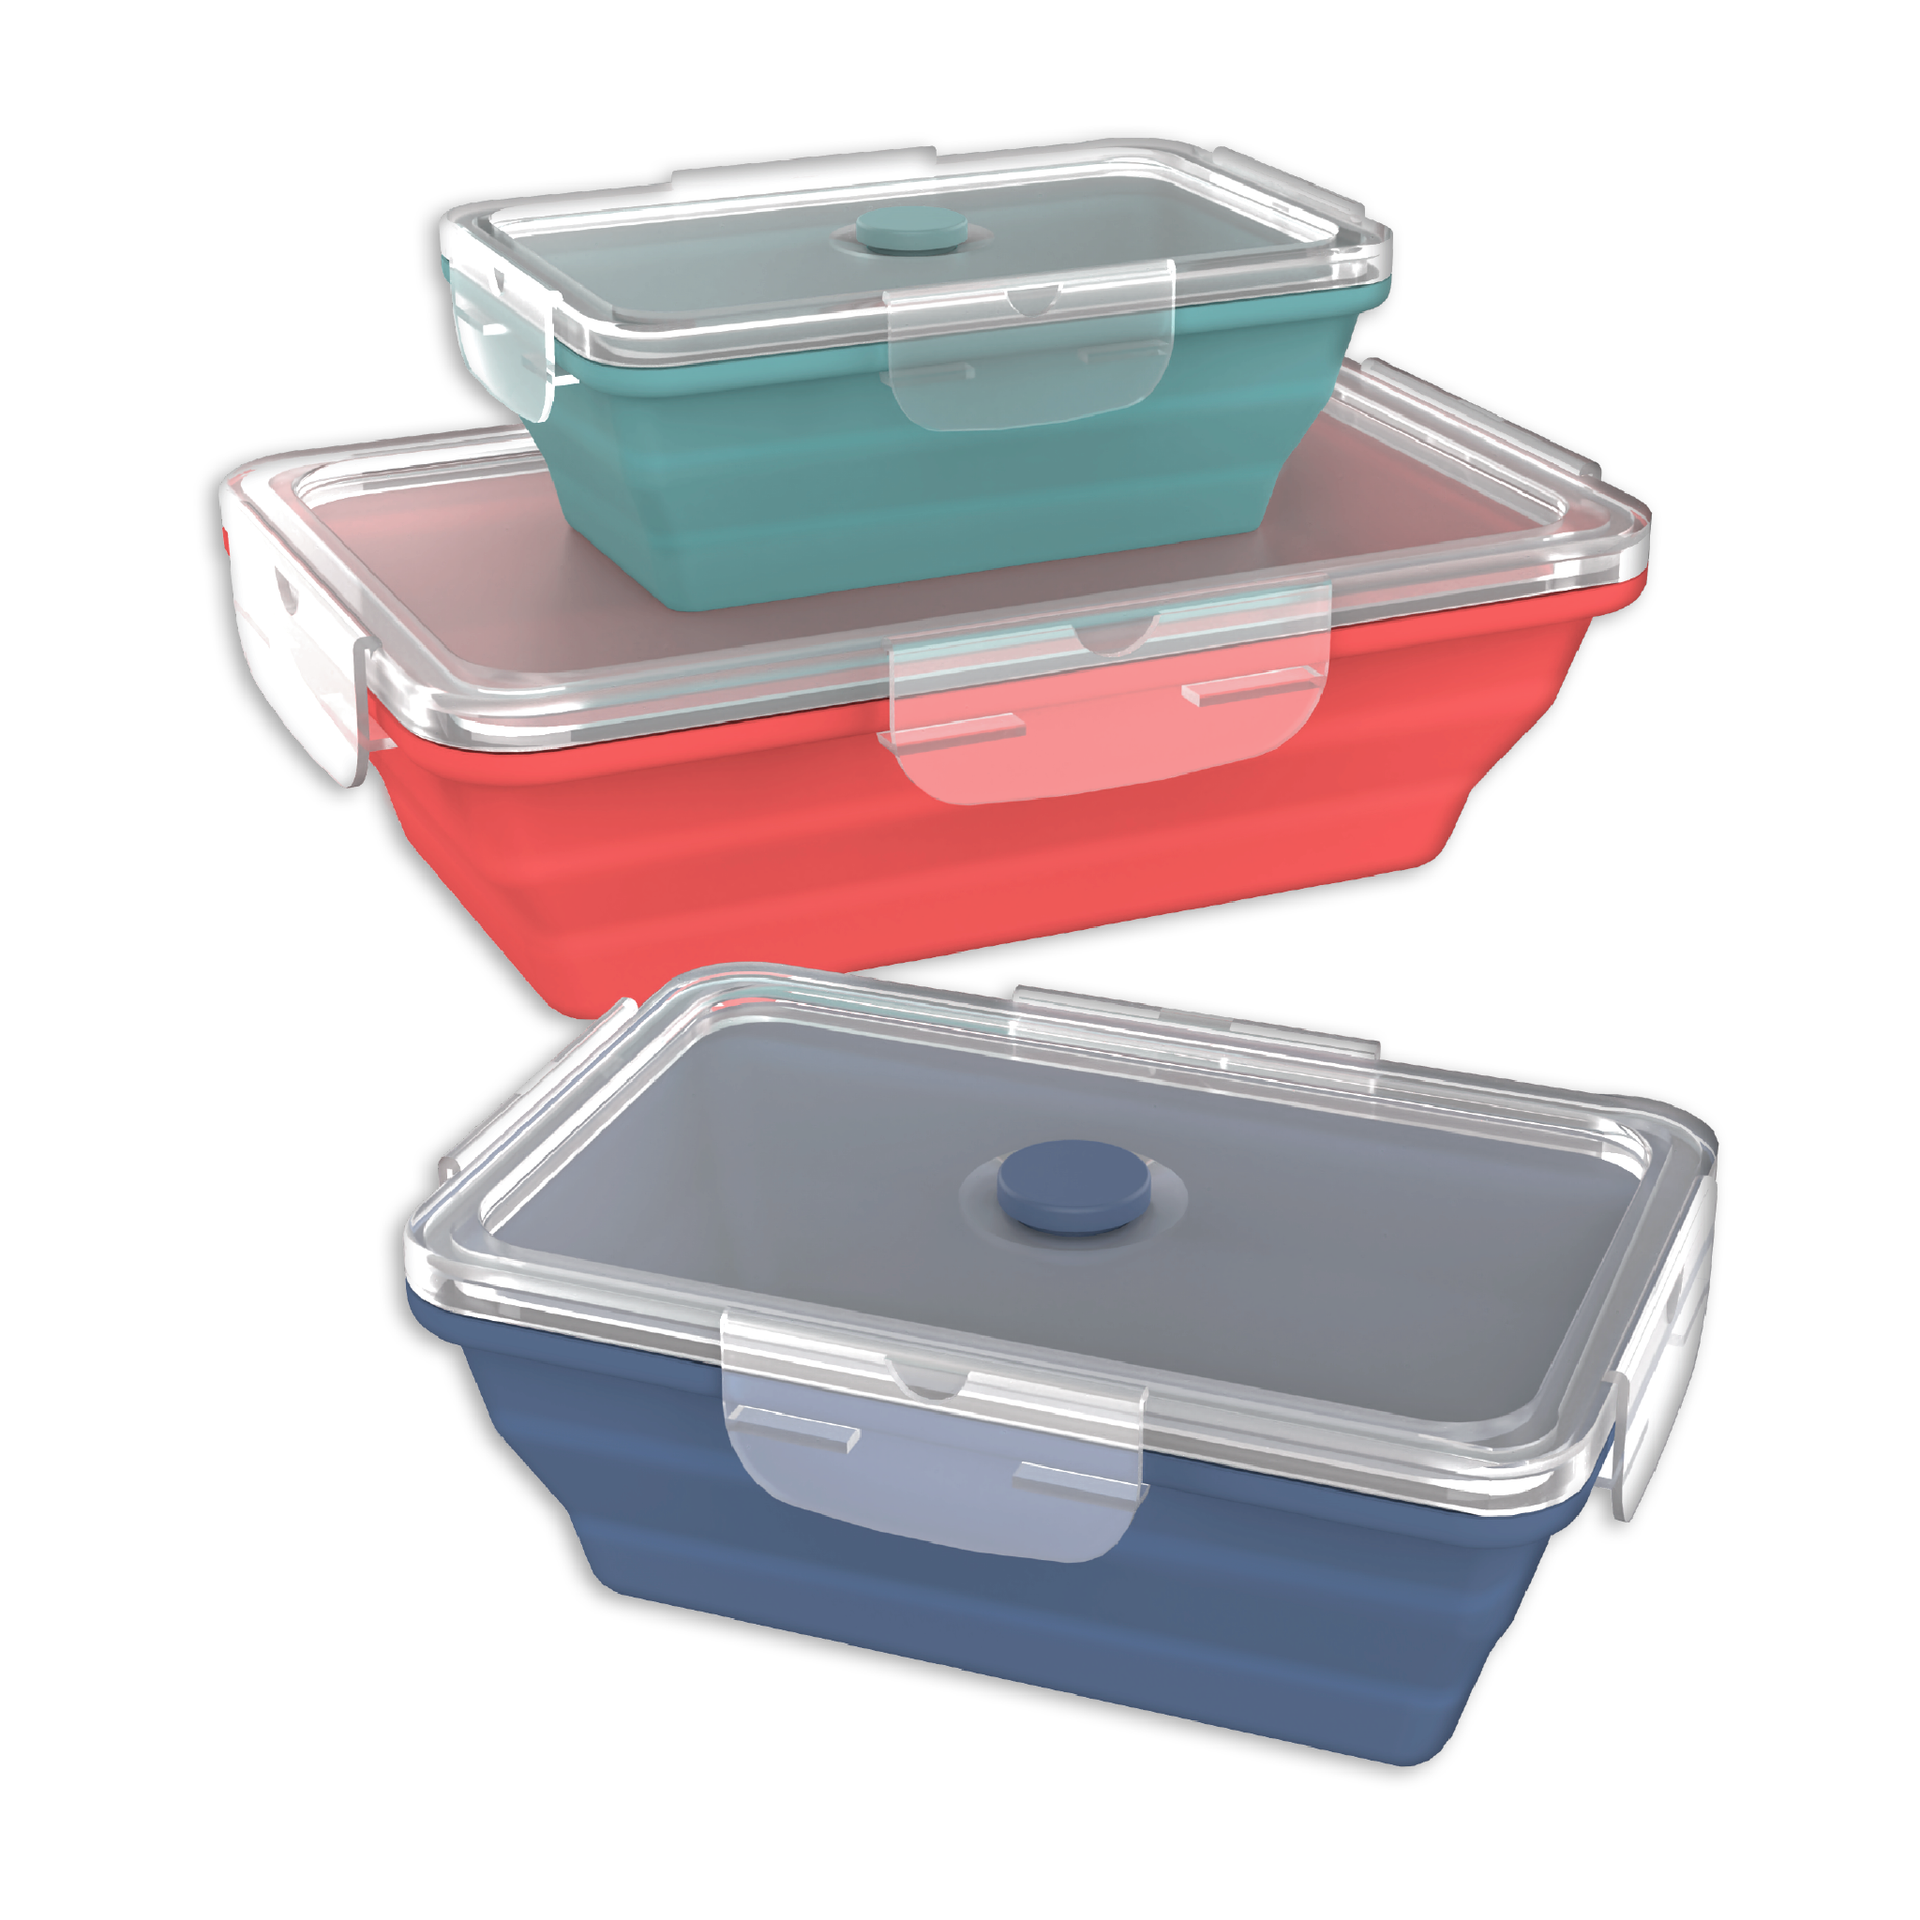 ECOBERI Collapsible Food Storage Containers, Airtight Snap-Top Lids,  Microwave, Dishwasher Safe, BPA Free Silicone, Set of 4